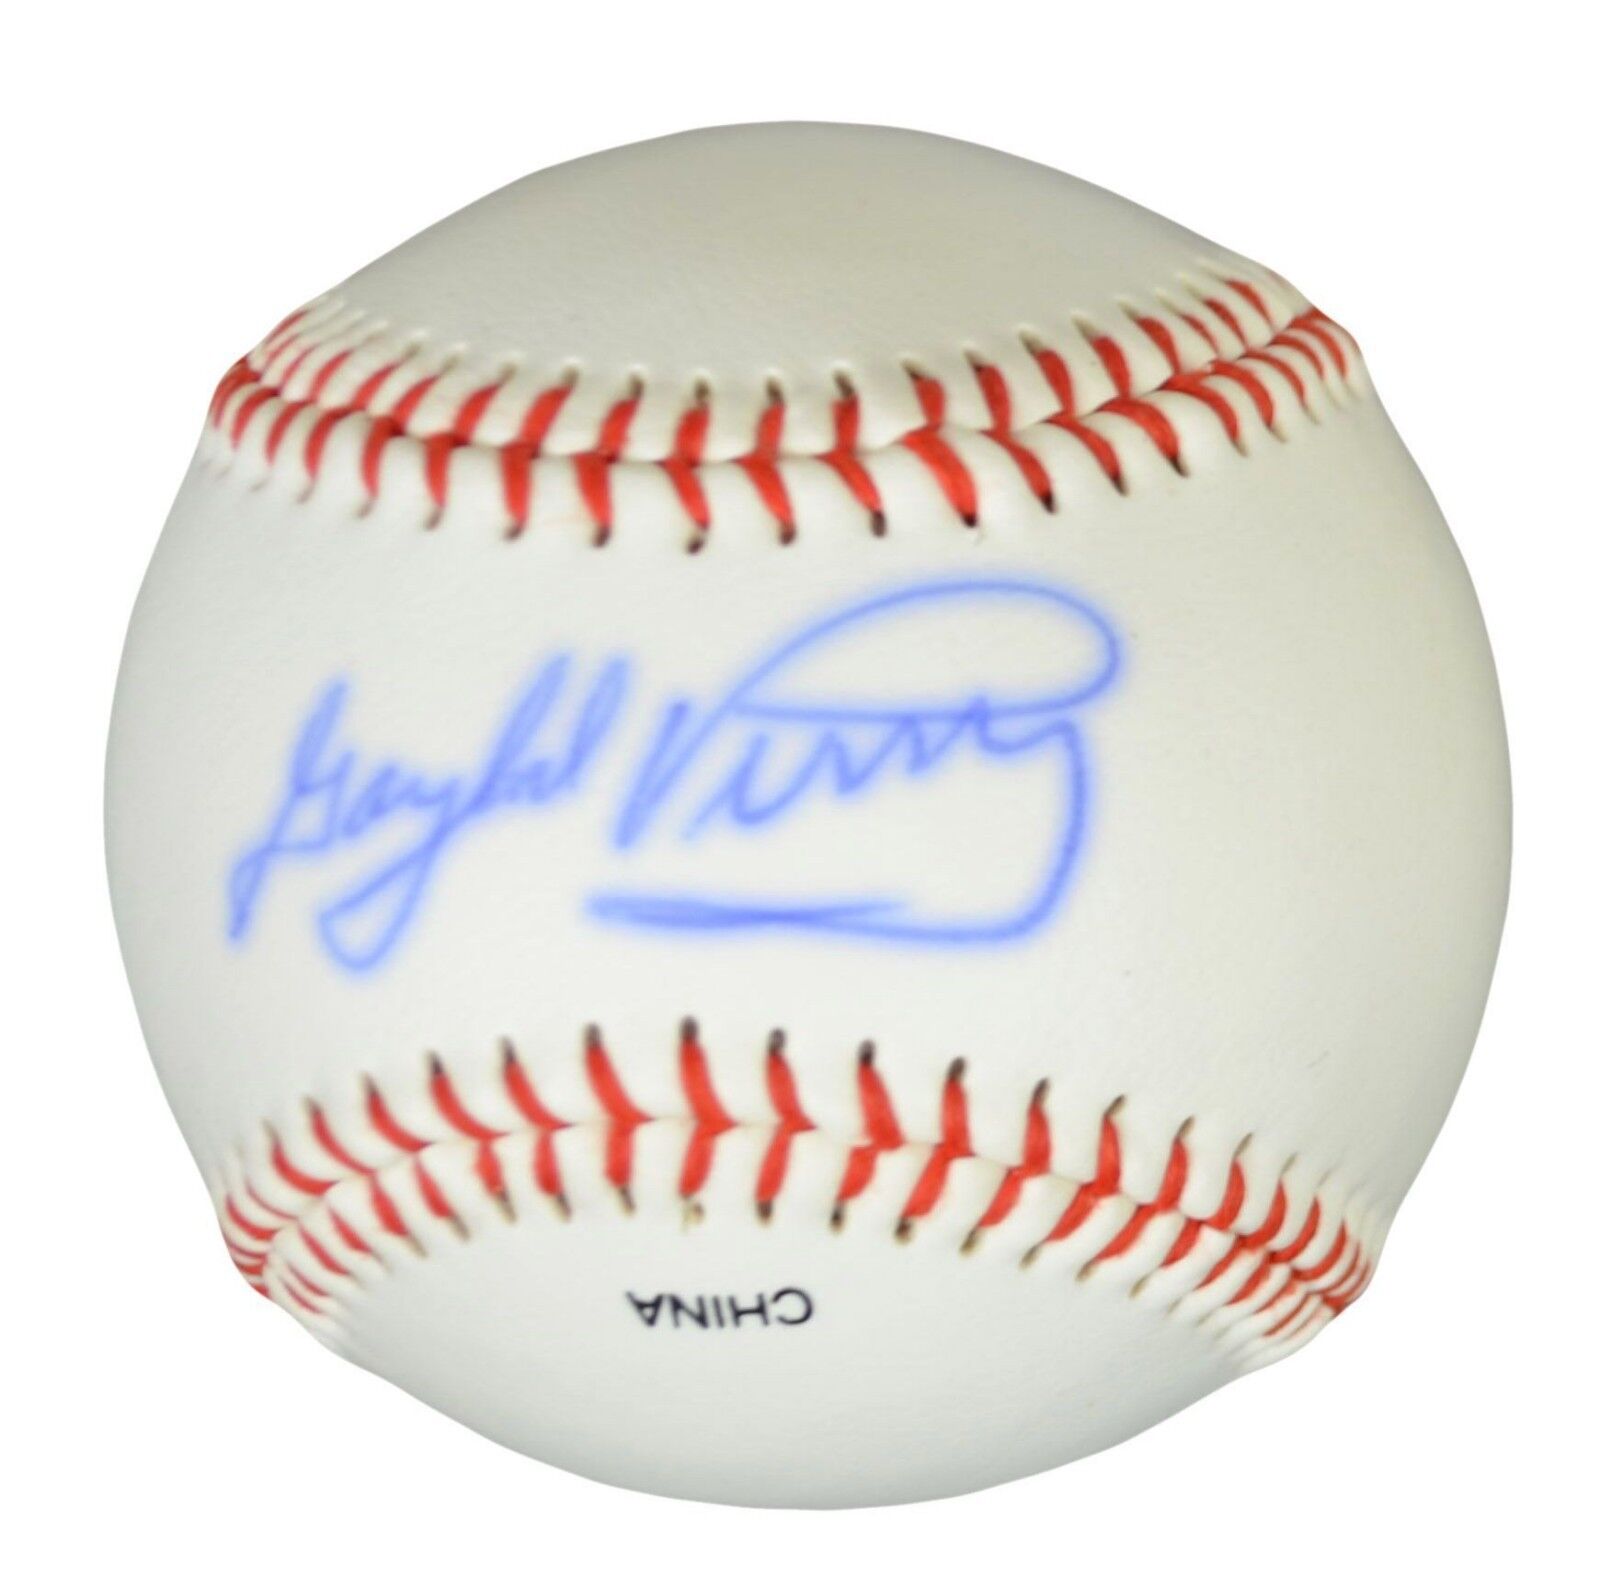 Gaylord Perry Hall of Famer Single Signed Baseball Mint Condition Ships Free